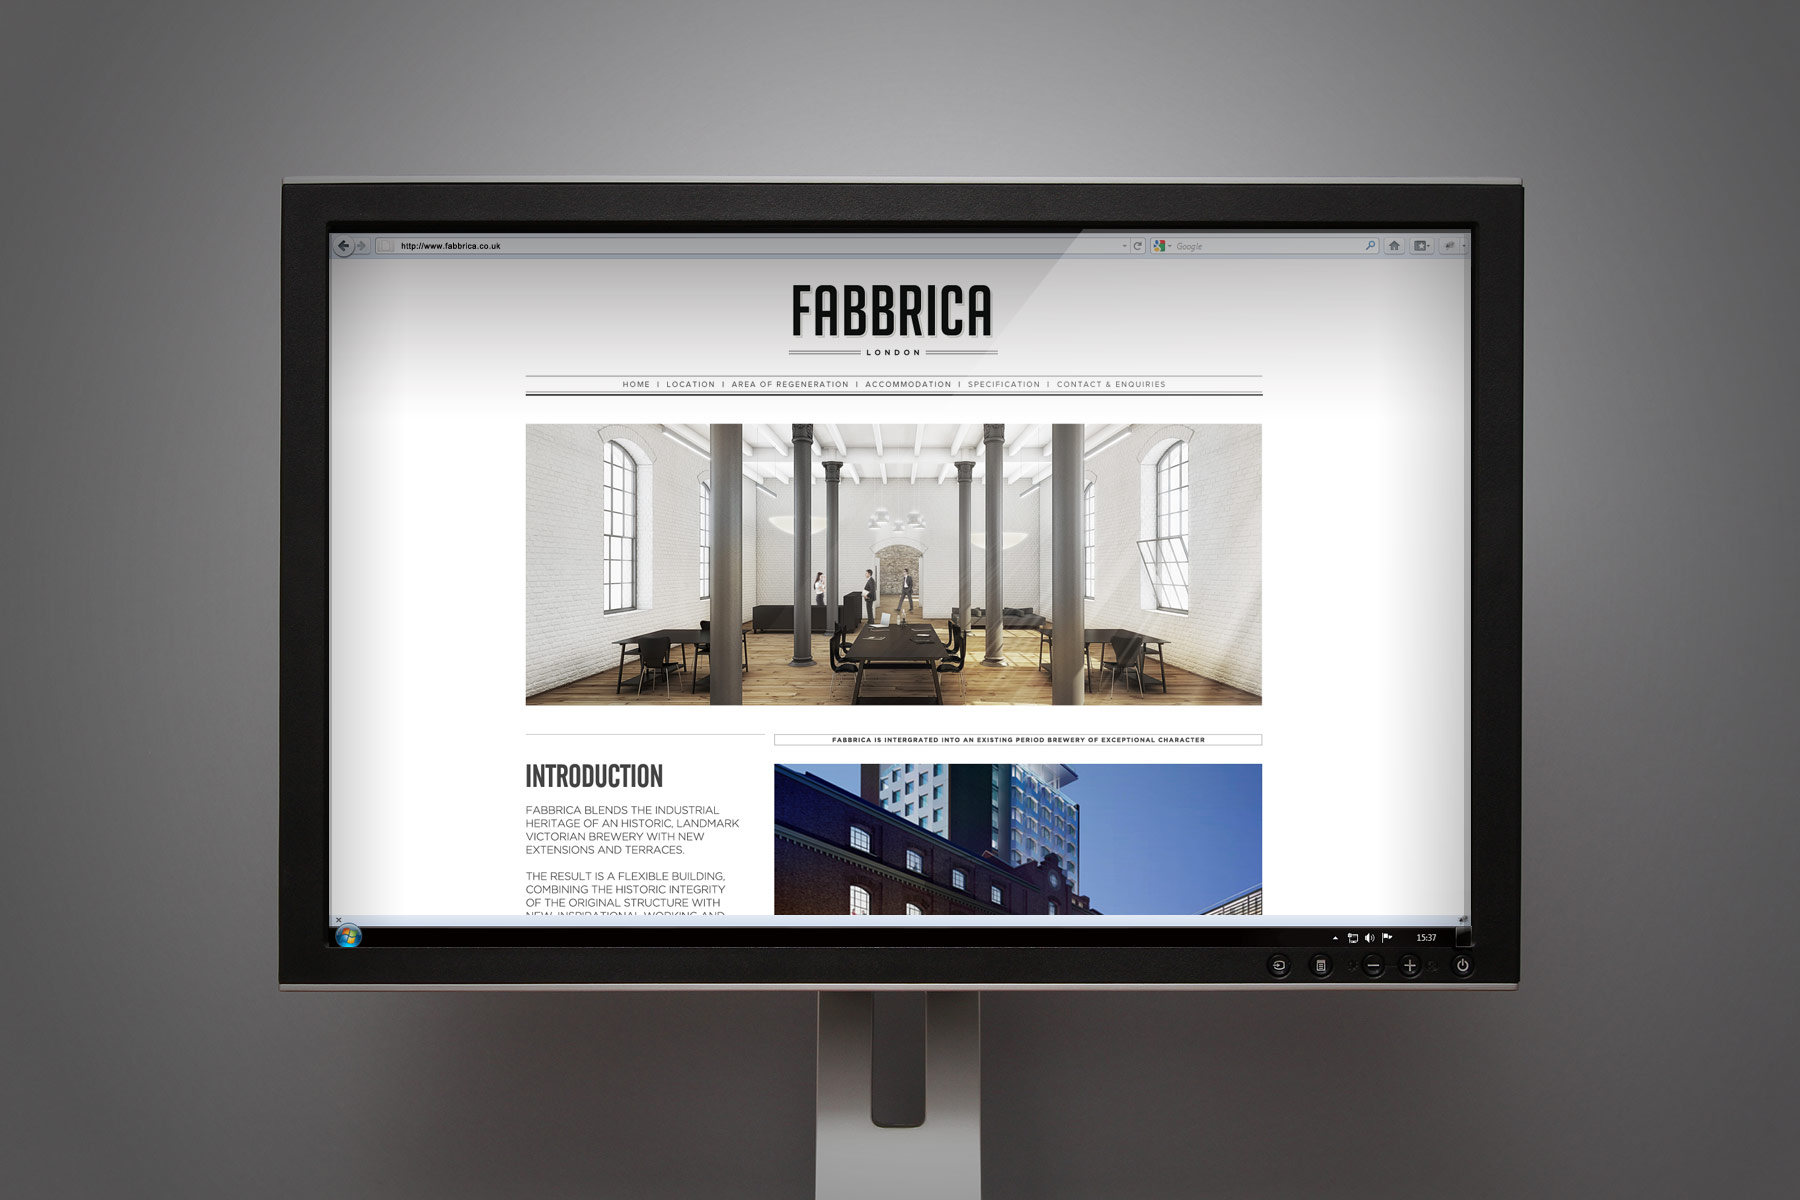 The Fabricca brand has its own dedicated website and brochure designed to sell the key attributes of the commercial development. The site is also built on the Wordpress CMS system.